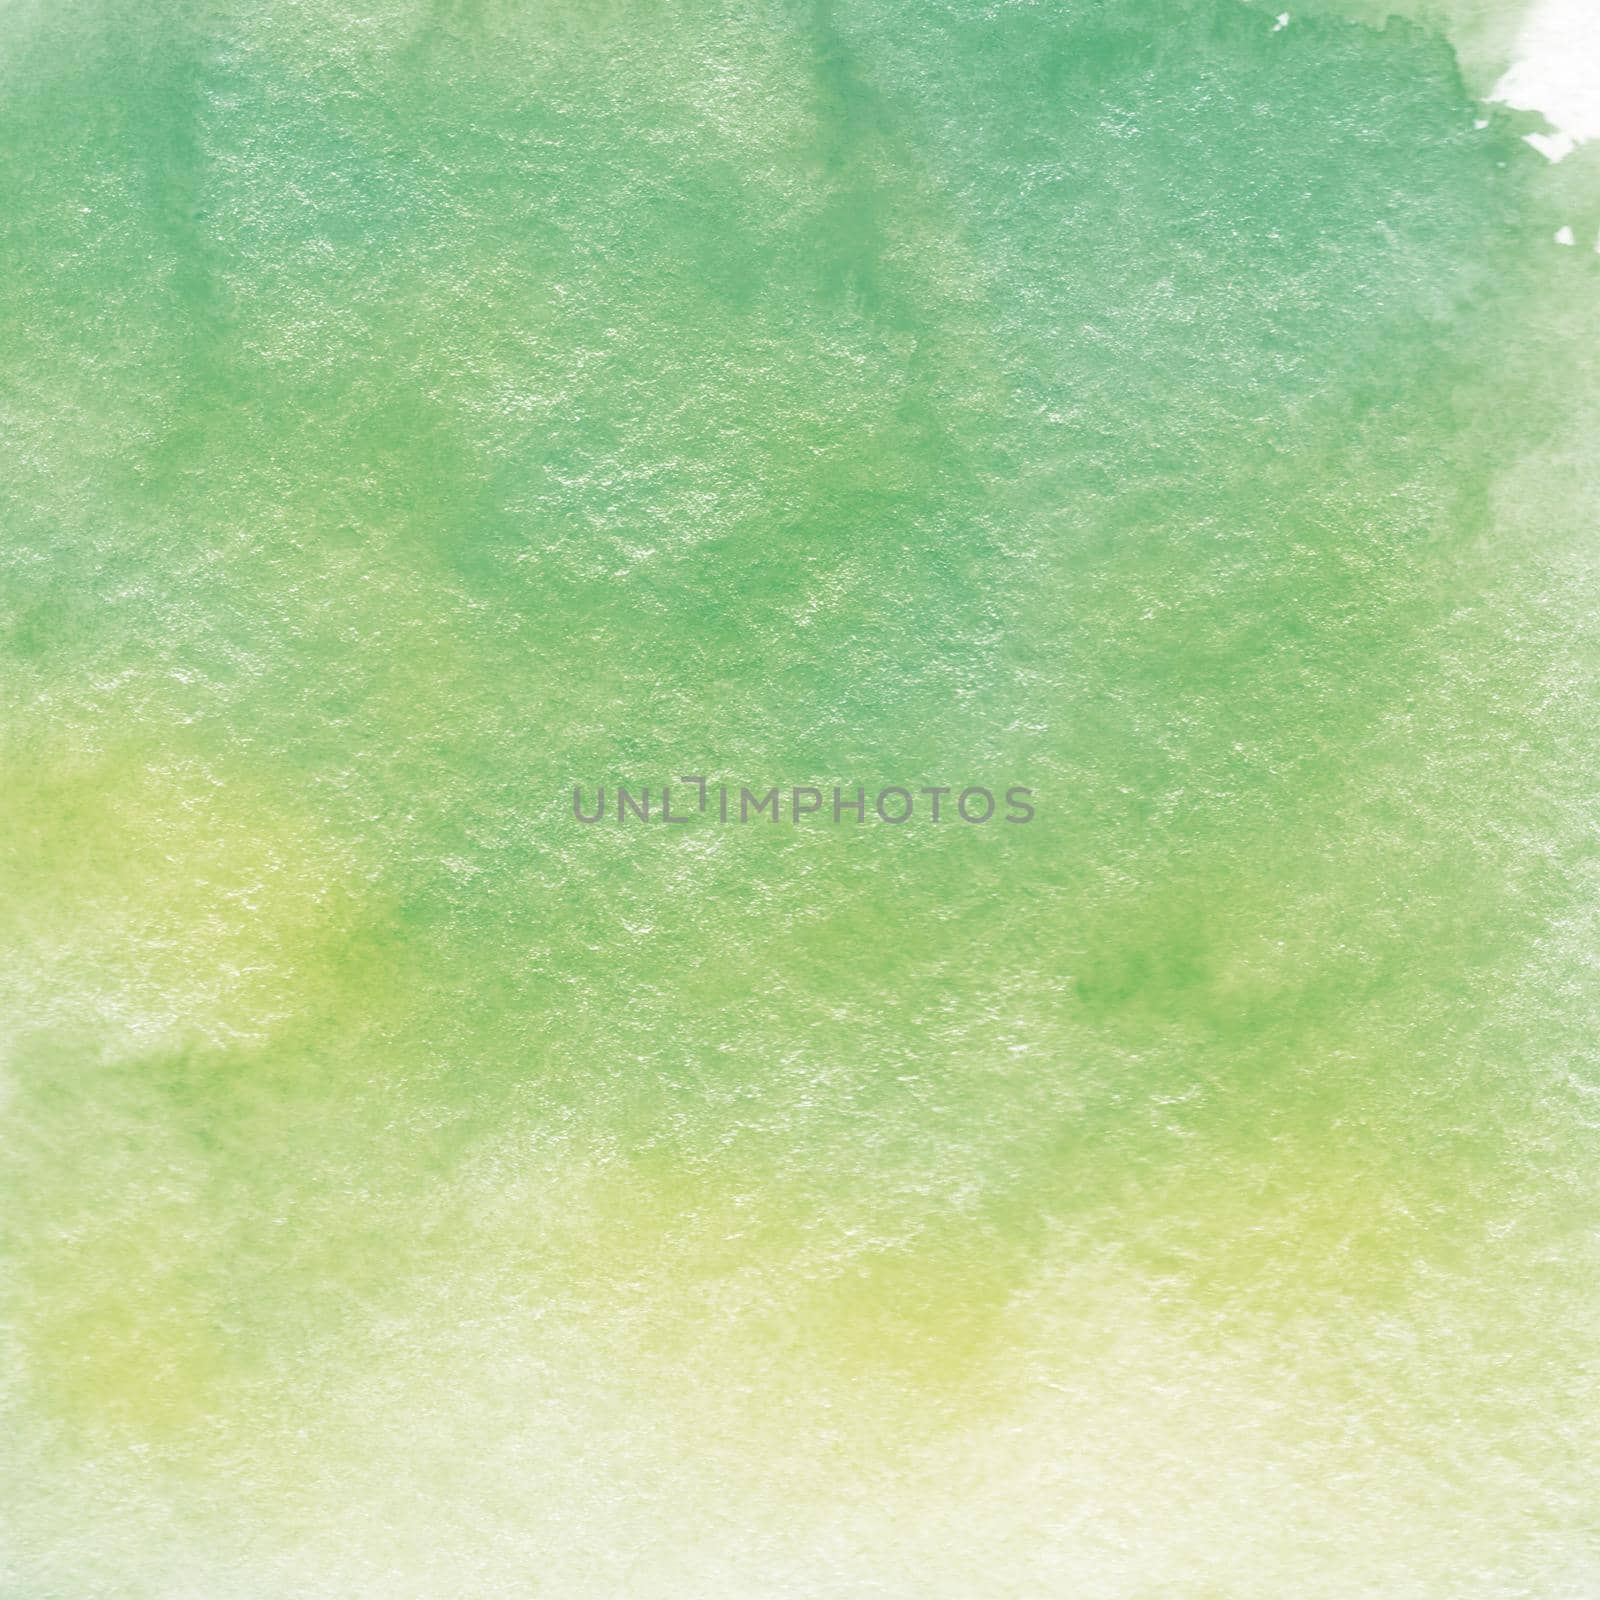 Abstract grunge tender mint colored background for scrapbooking and artistic design